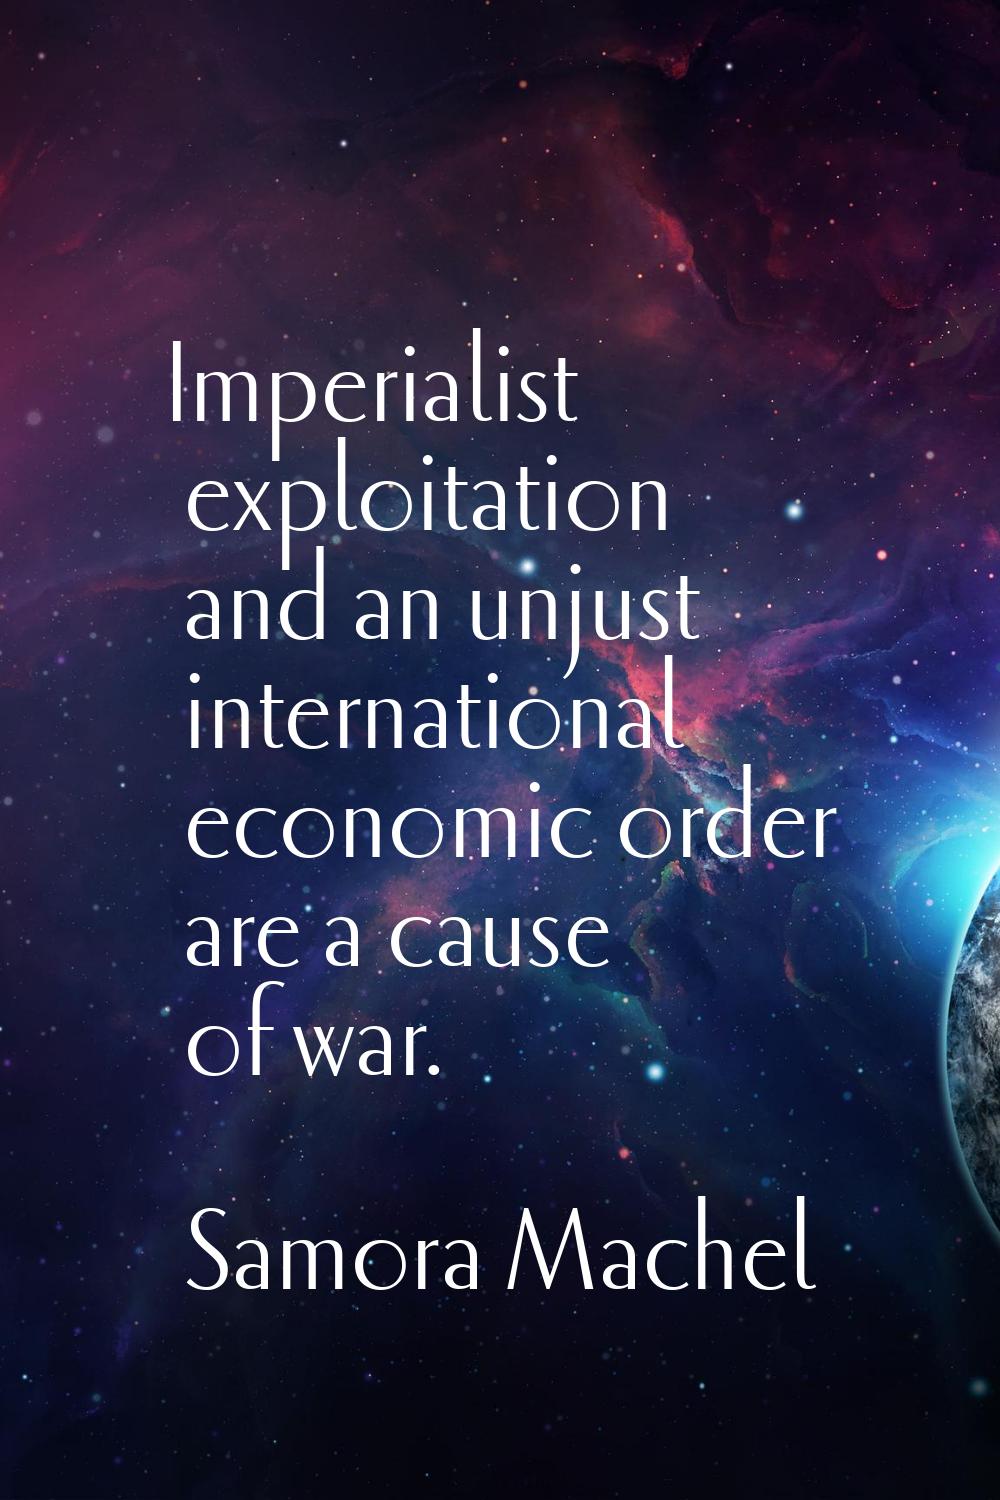 Imperialist exploitation and an unjust international economic order are a cause of war.